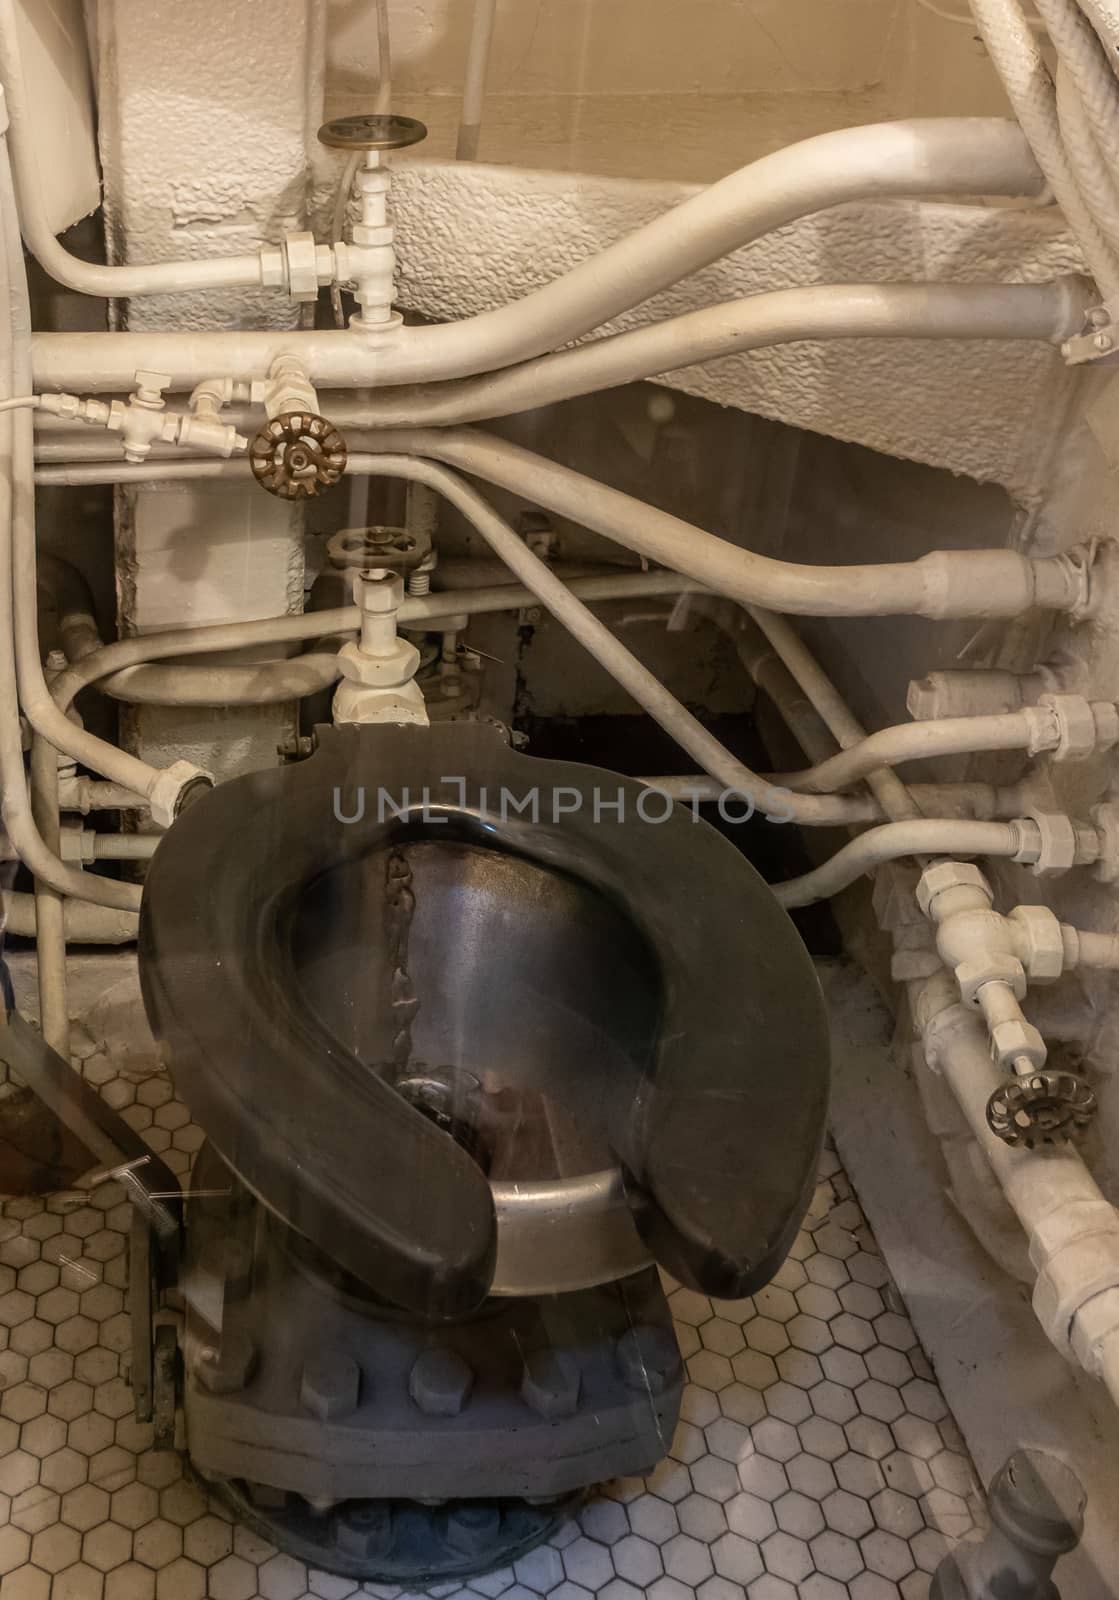 Oahu, Hawaii, USA. - January 10, 2020: Pearl Harbor. Black toilet bowl with white painted pipes and tubes in back in long submarine USS Bowfin.